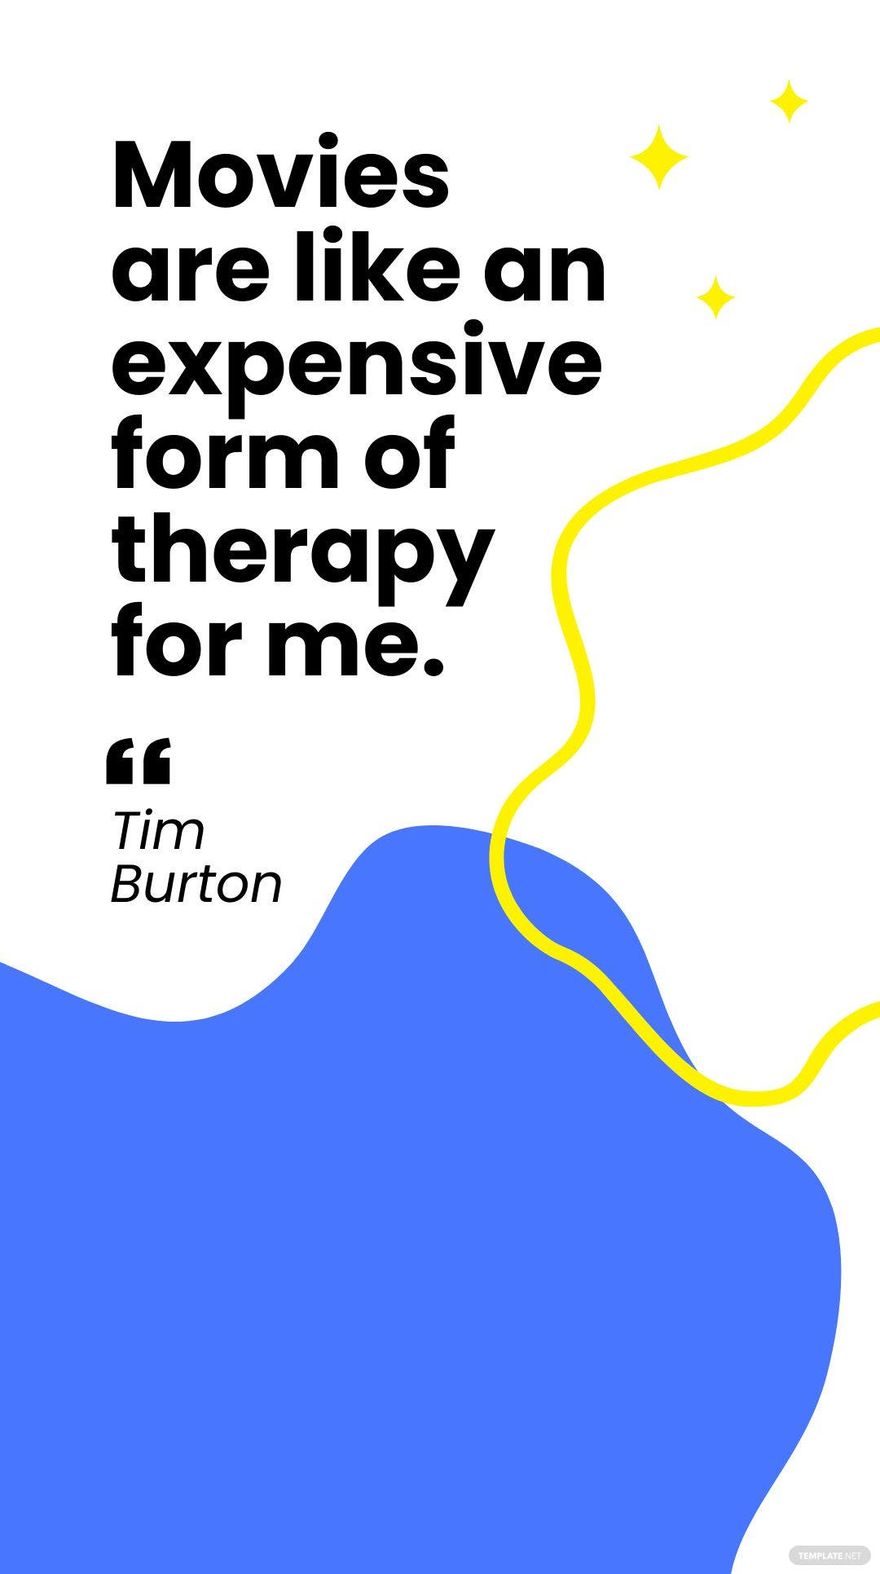 Tim Burton - Movies are like an expensive form of therapy for me.